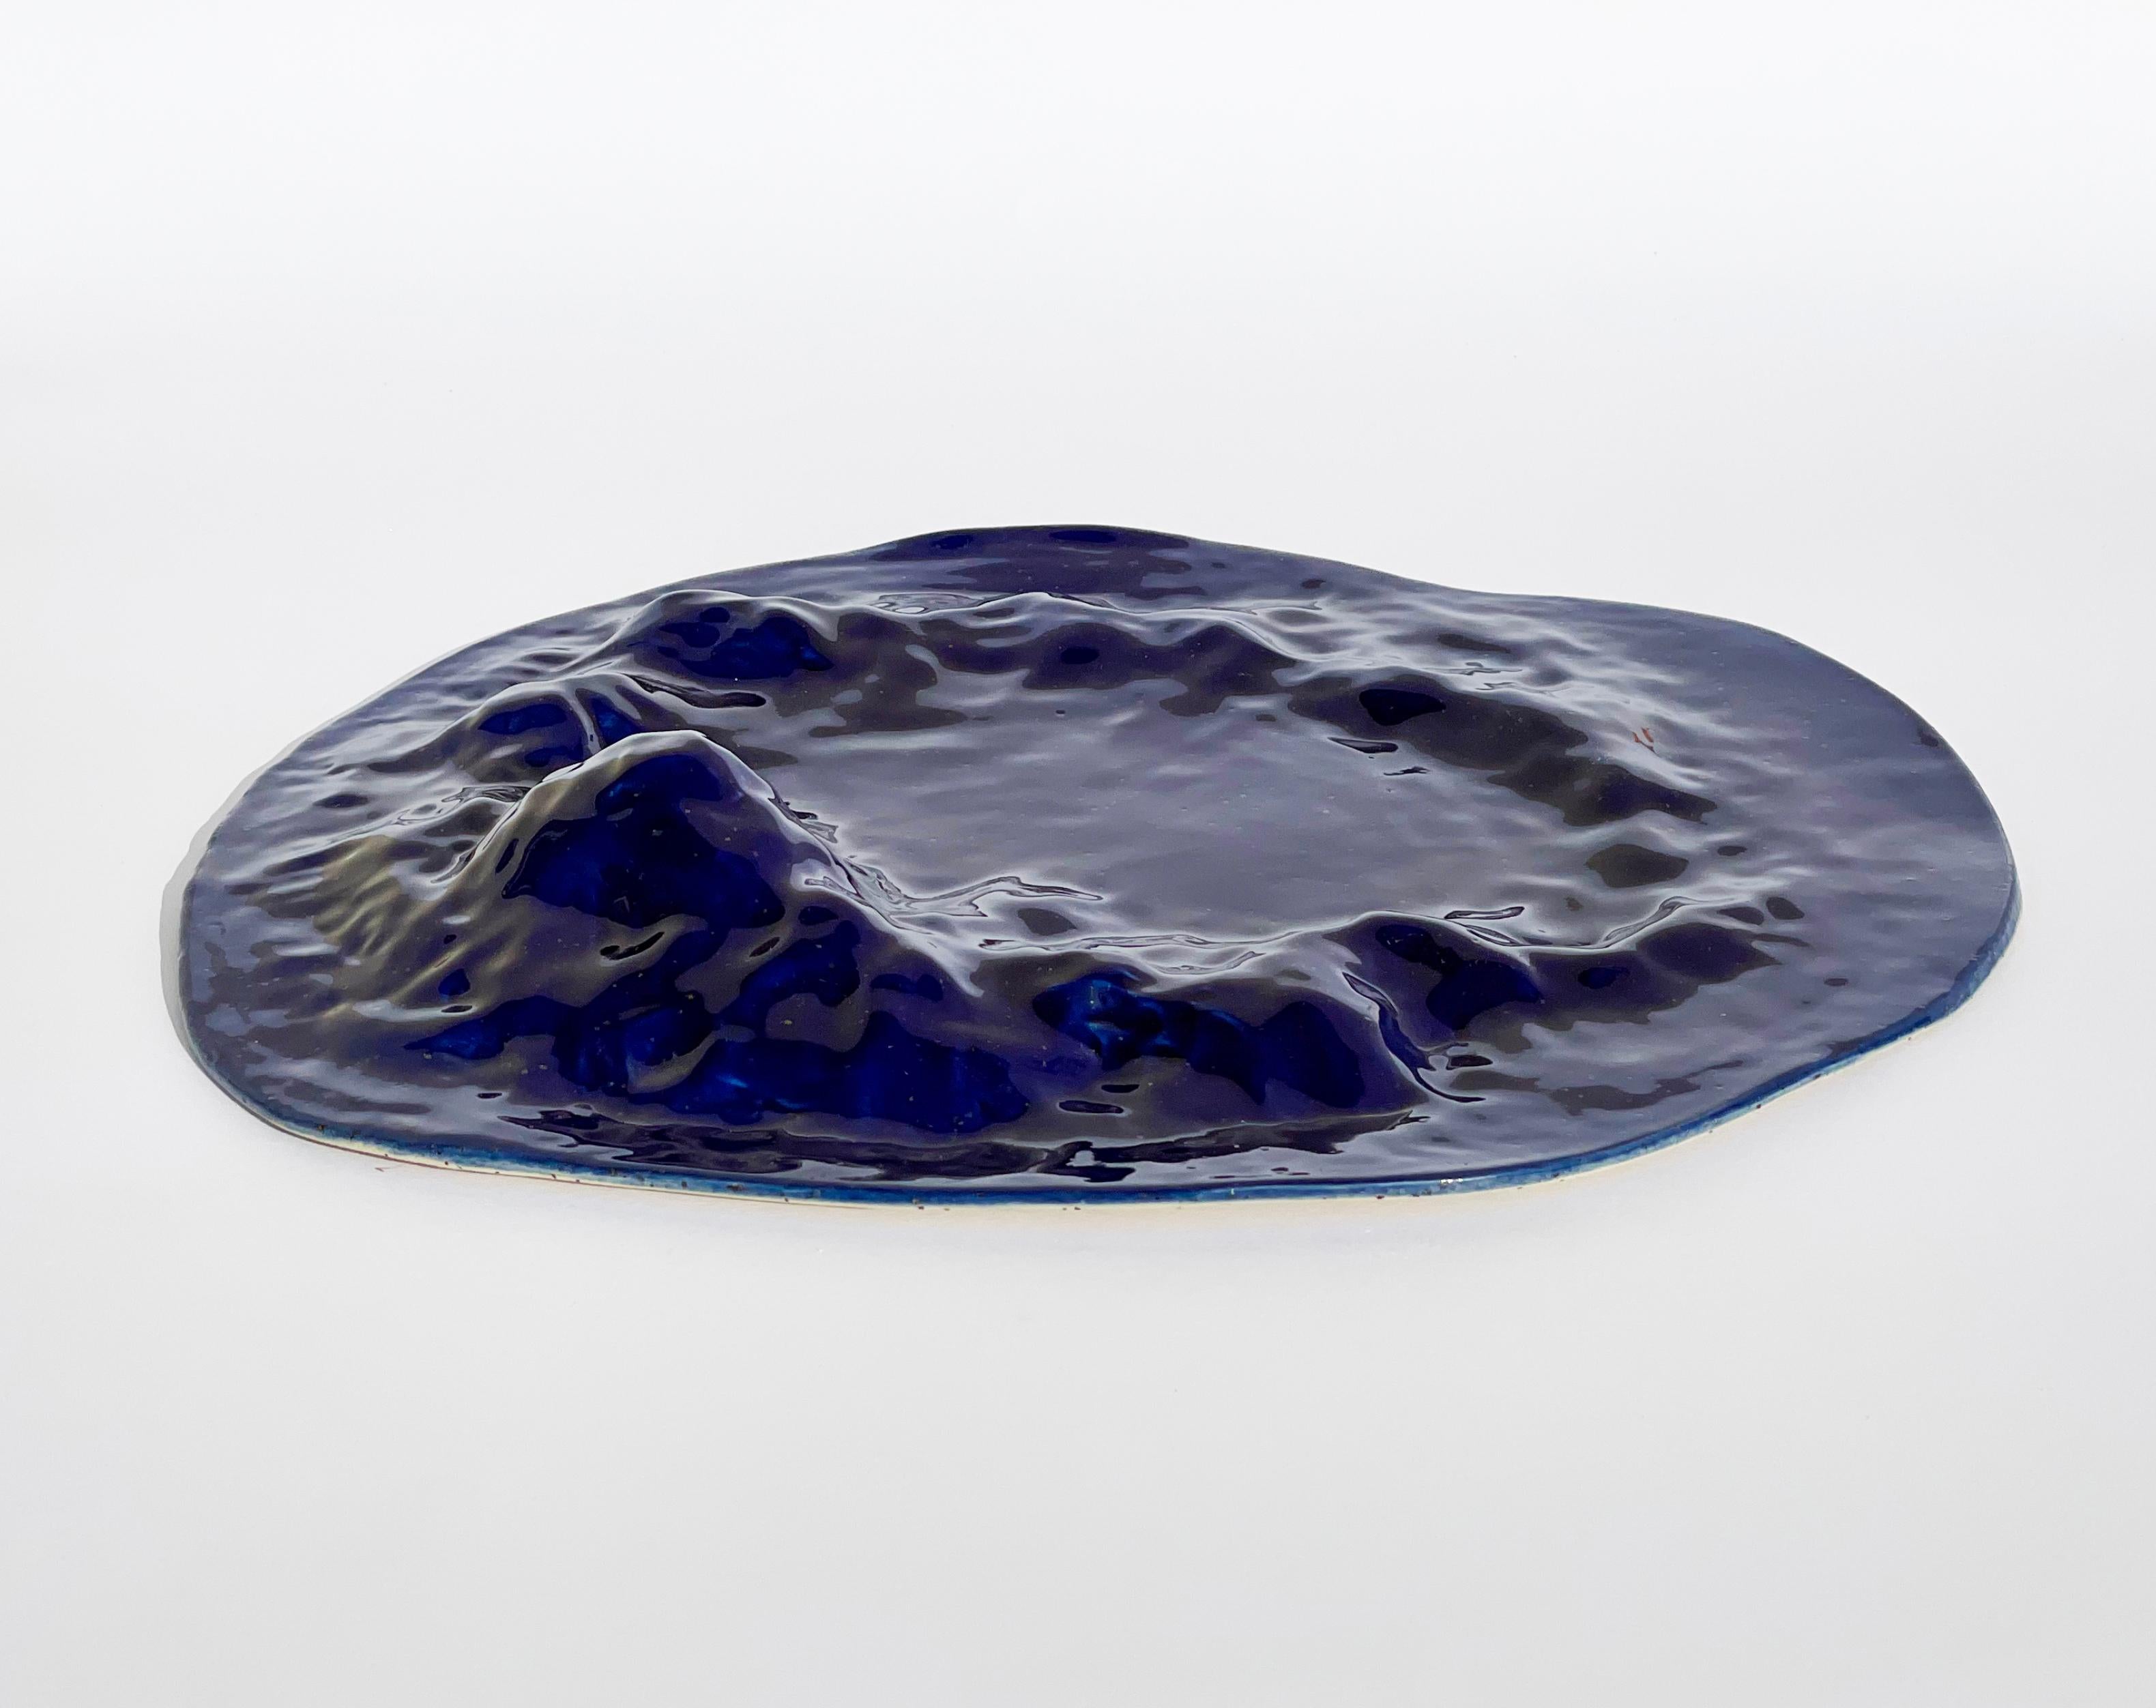 Gongshi plates

Hand made Unique Undulating Form Plates, Objet d'Art in cobalt blue.

These sculptural plates are taking inspiration from the Chinese ‘gongshi’
‘Gongshi (Chinese: ??), also known as scholar's rocks, are naturally occurring or